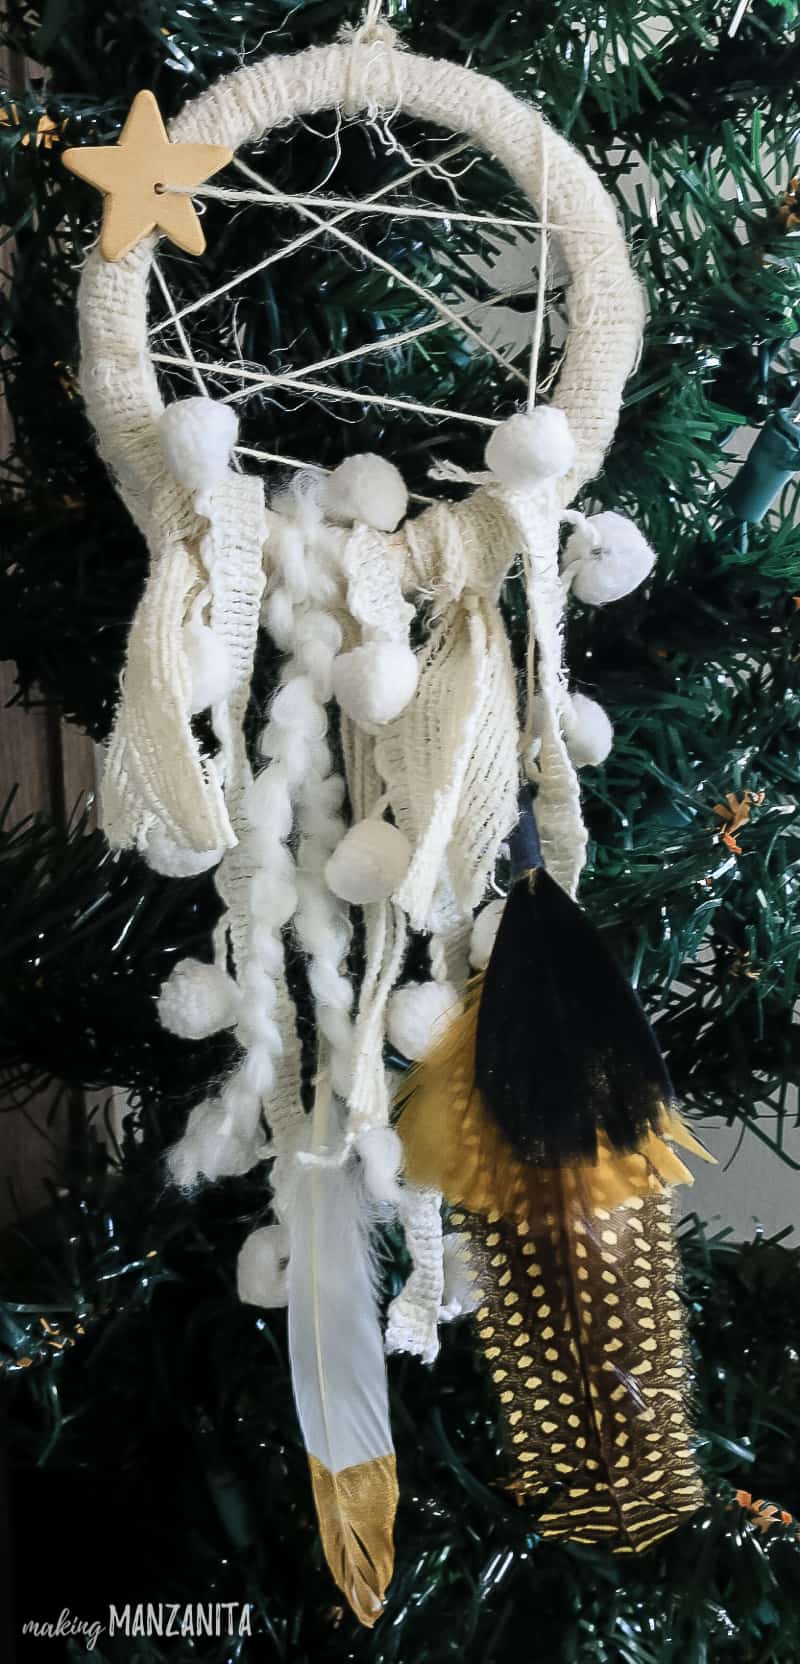 A mini dreamcatcher ornament hanging on a christmas tree branch, and hanging fabric pieces and decorative flowers.